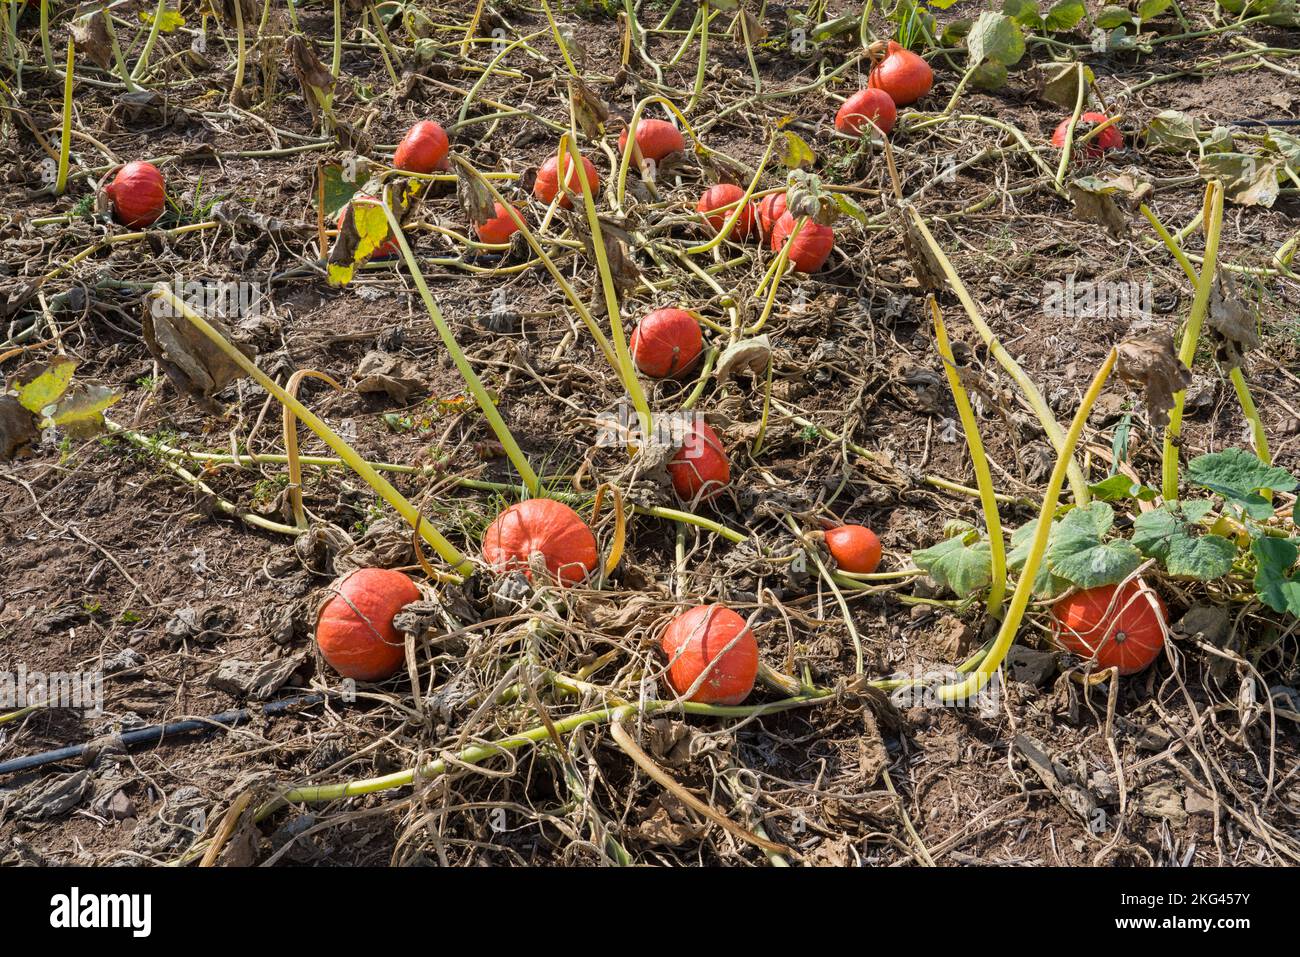 A field with Red kuri squash in September, Weserbergland; Germany Stock Photo